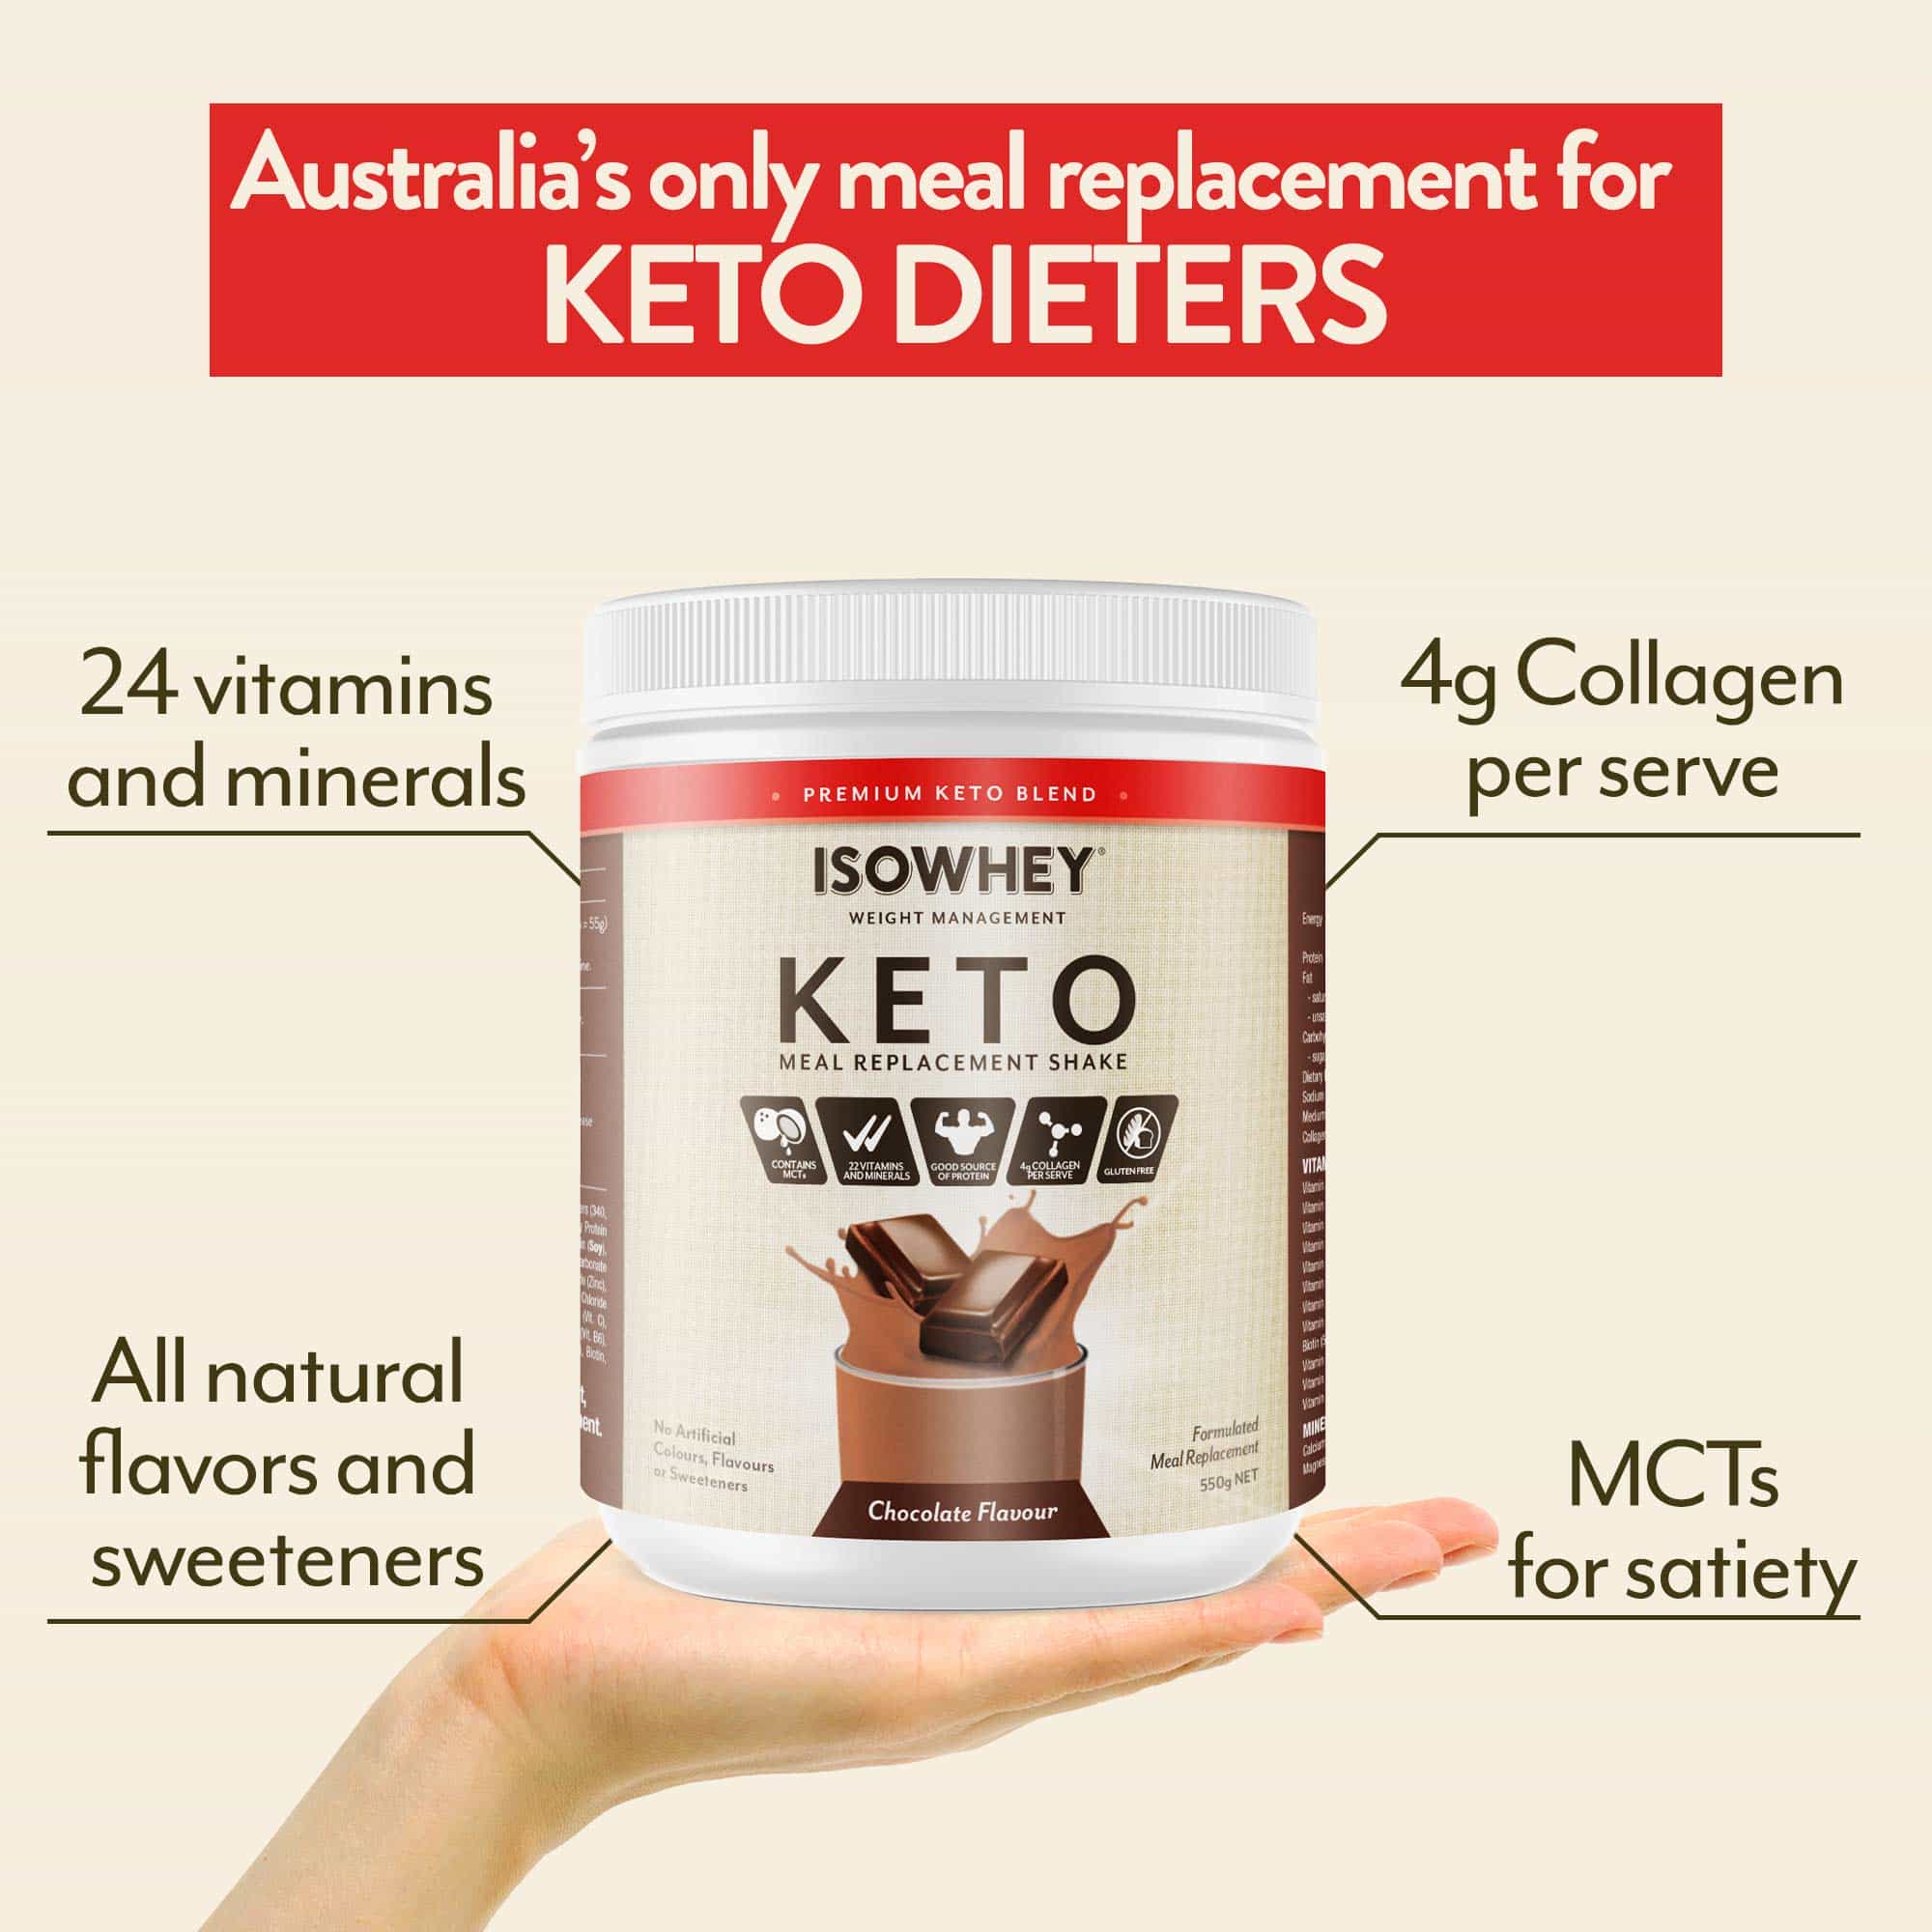 IsoWhey Keto Meal Replacement Shake Chocolate 550g for Keto dieters